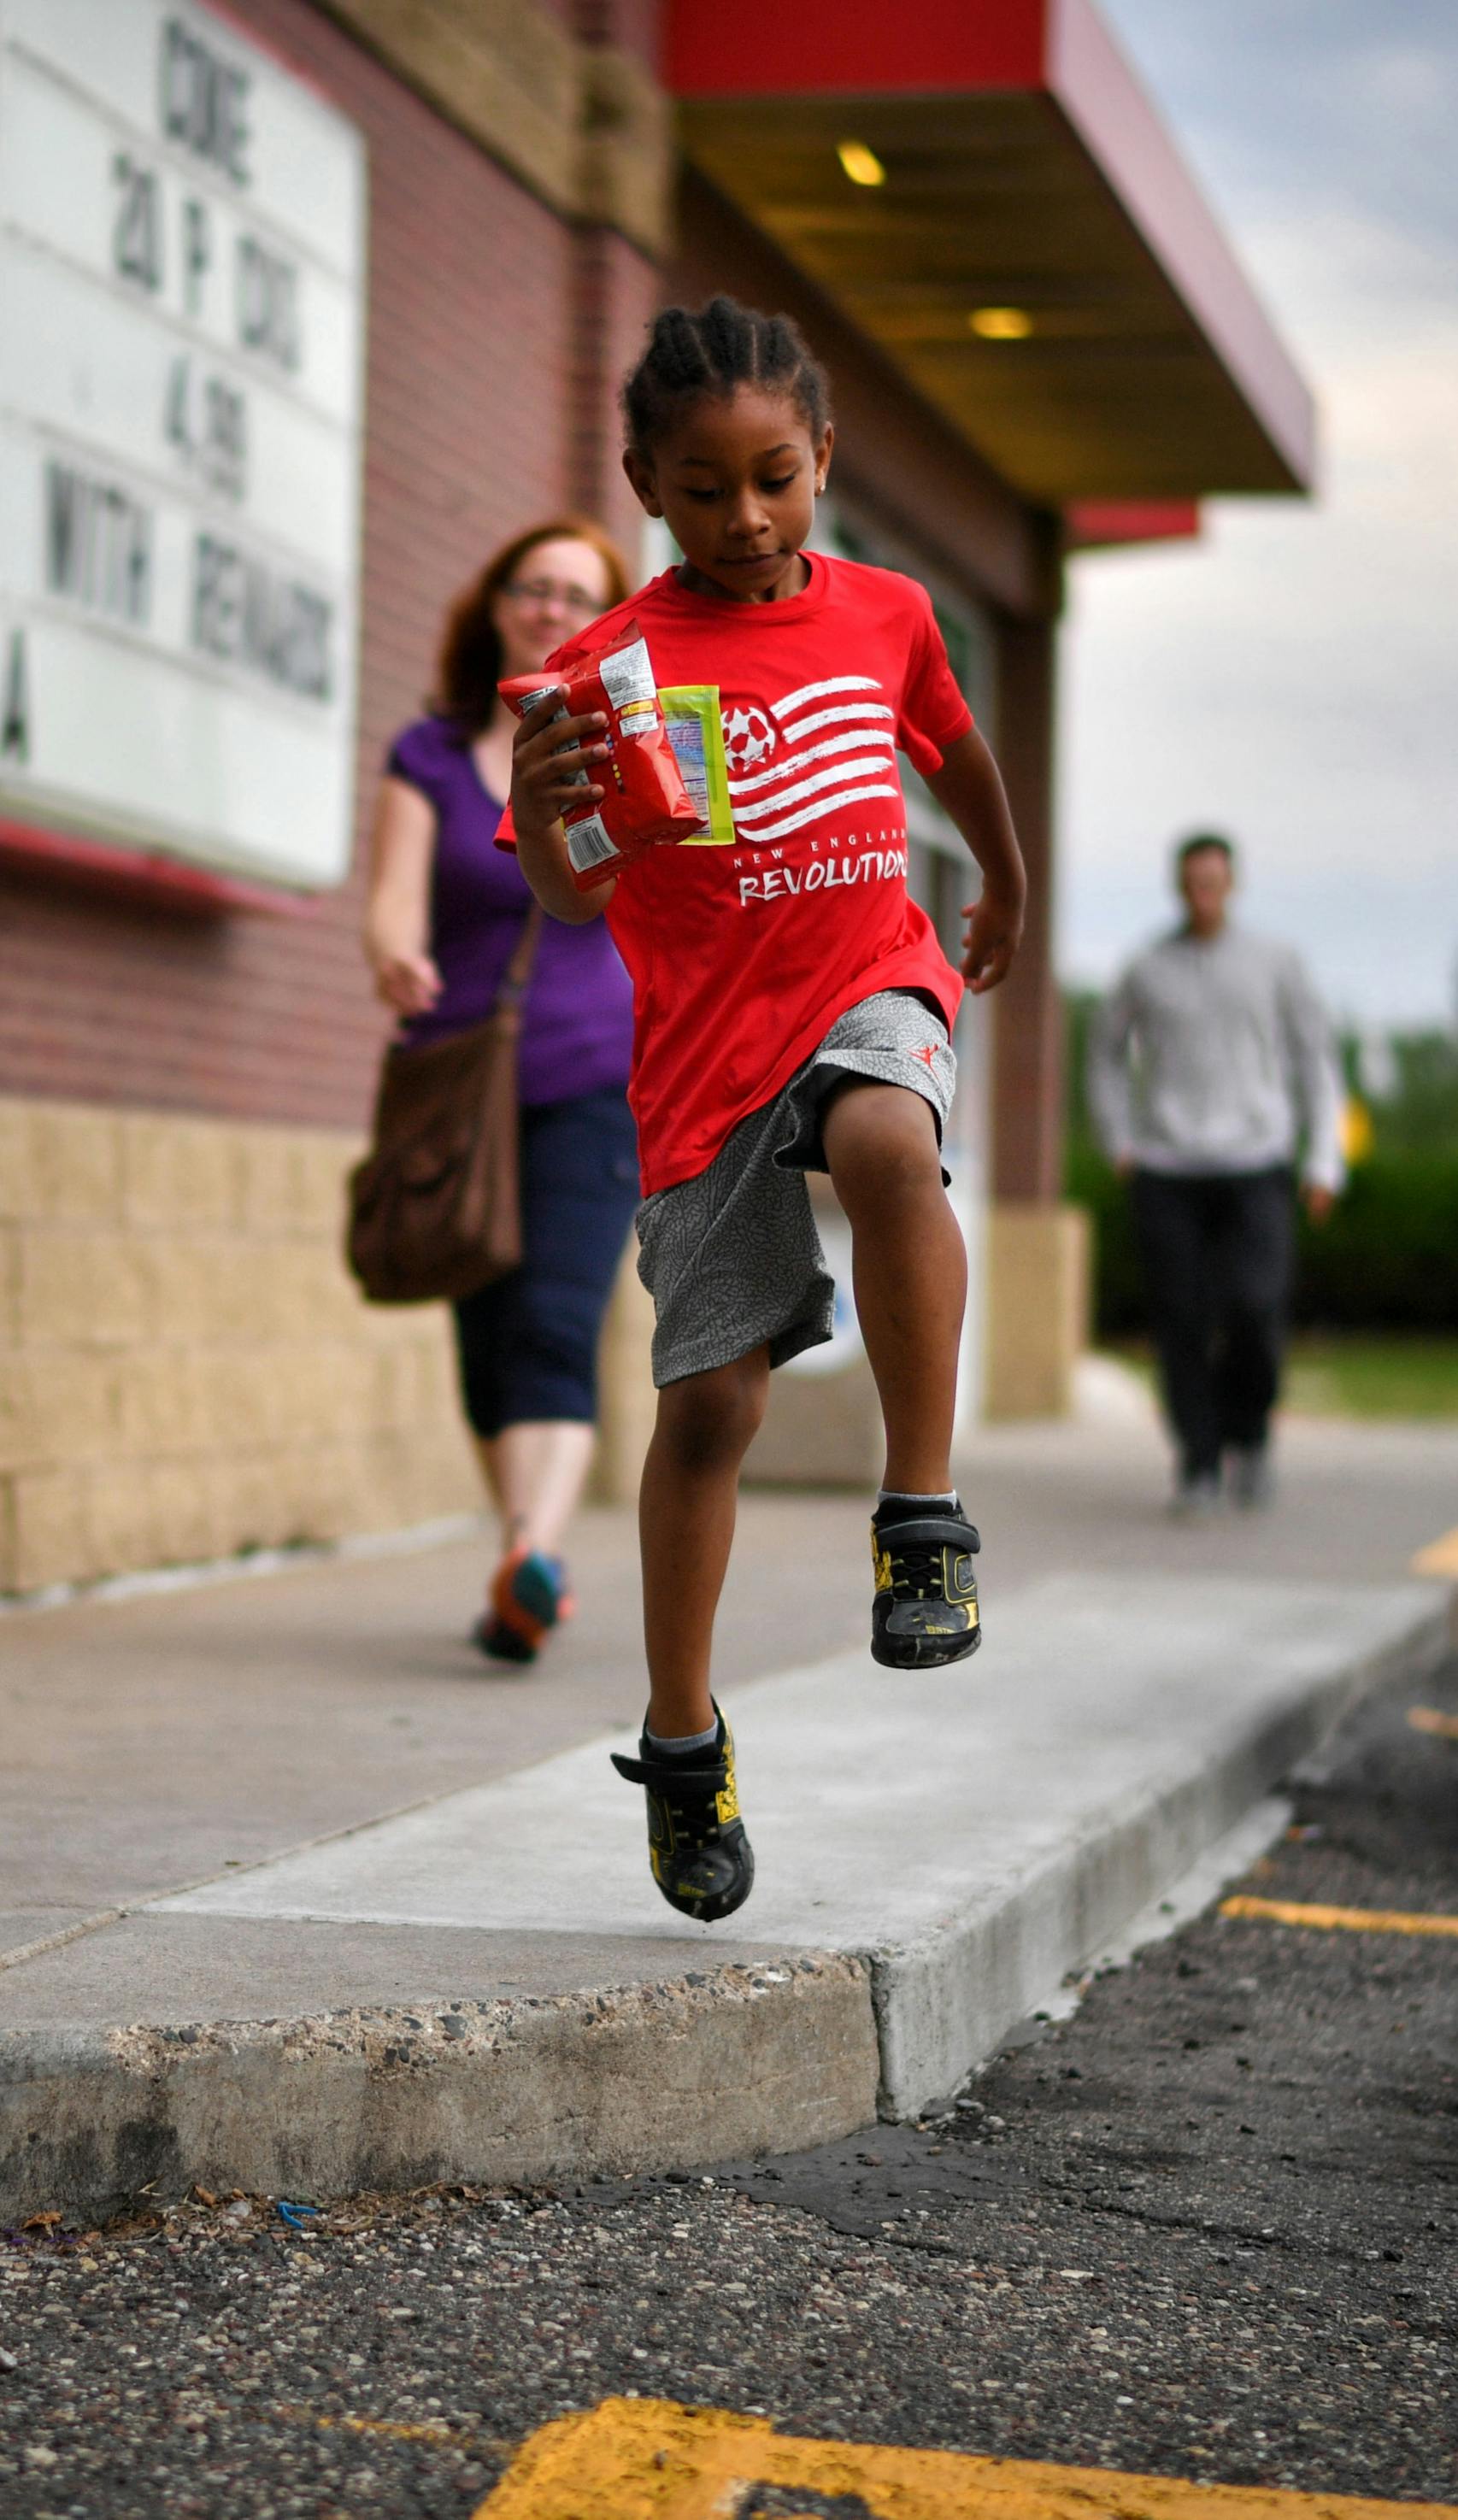 Snacks in hand, Jamaal Rolenc paraded out of a convenience store with a 5-year-old's energy as he and his grandmother, Sharon, were on their way to soccer practice. 